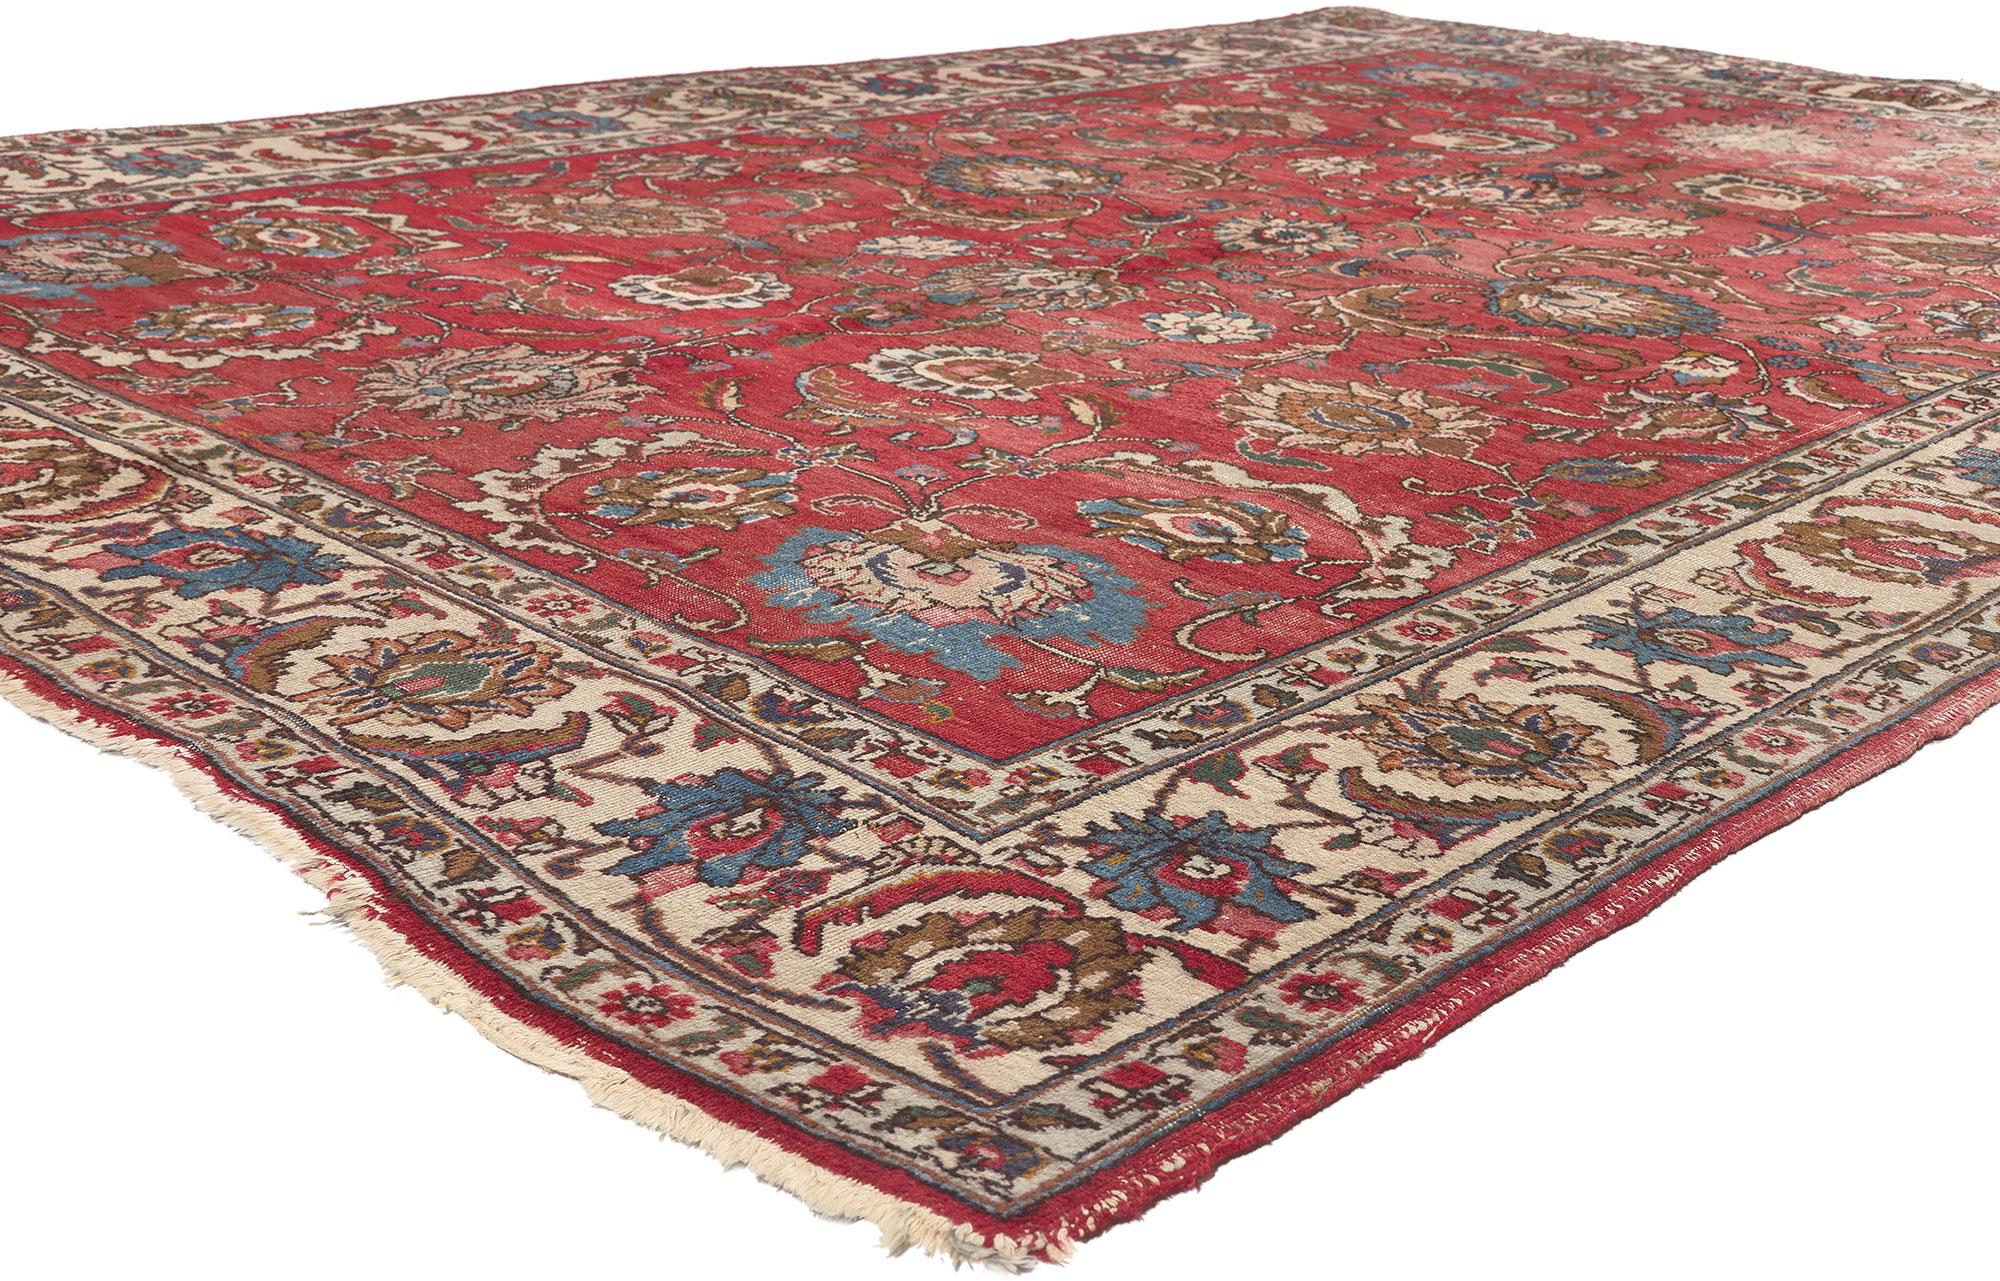 78237 Rustic Vintage Persian Tabriz Rug, 07'05 x 10'08. Laid-back luxury meets patriotic flair in this hand knotted wool vintage Persian Tabriz rug. The intricate botanical design and sophisticated color palette woven into this piece work together